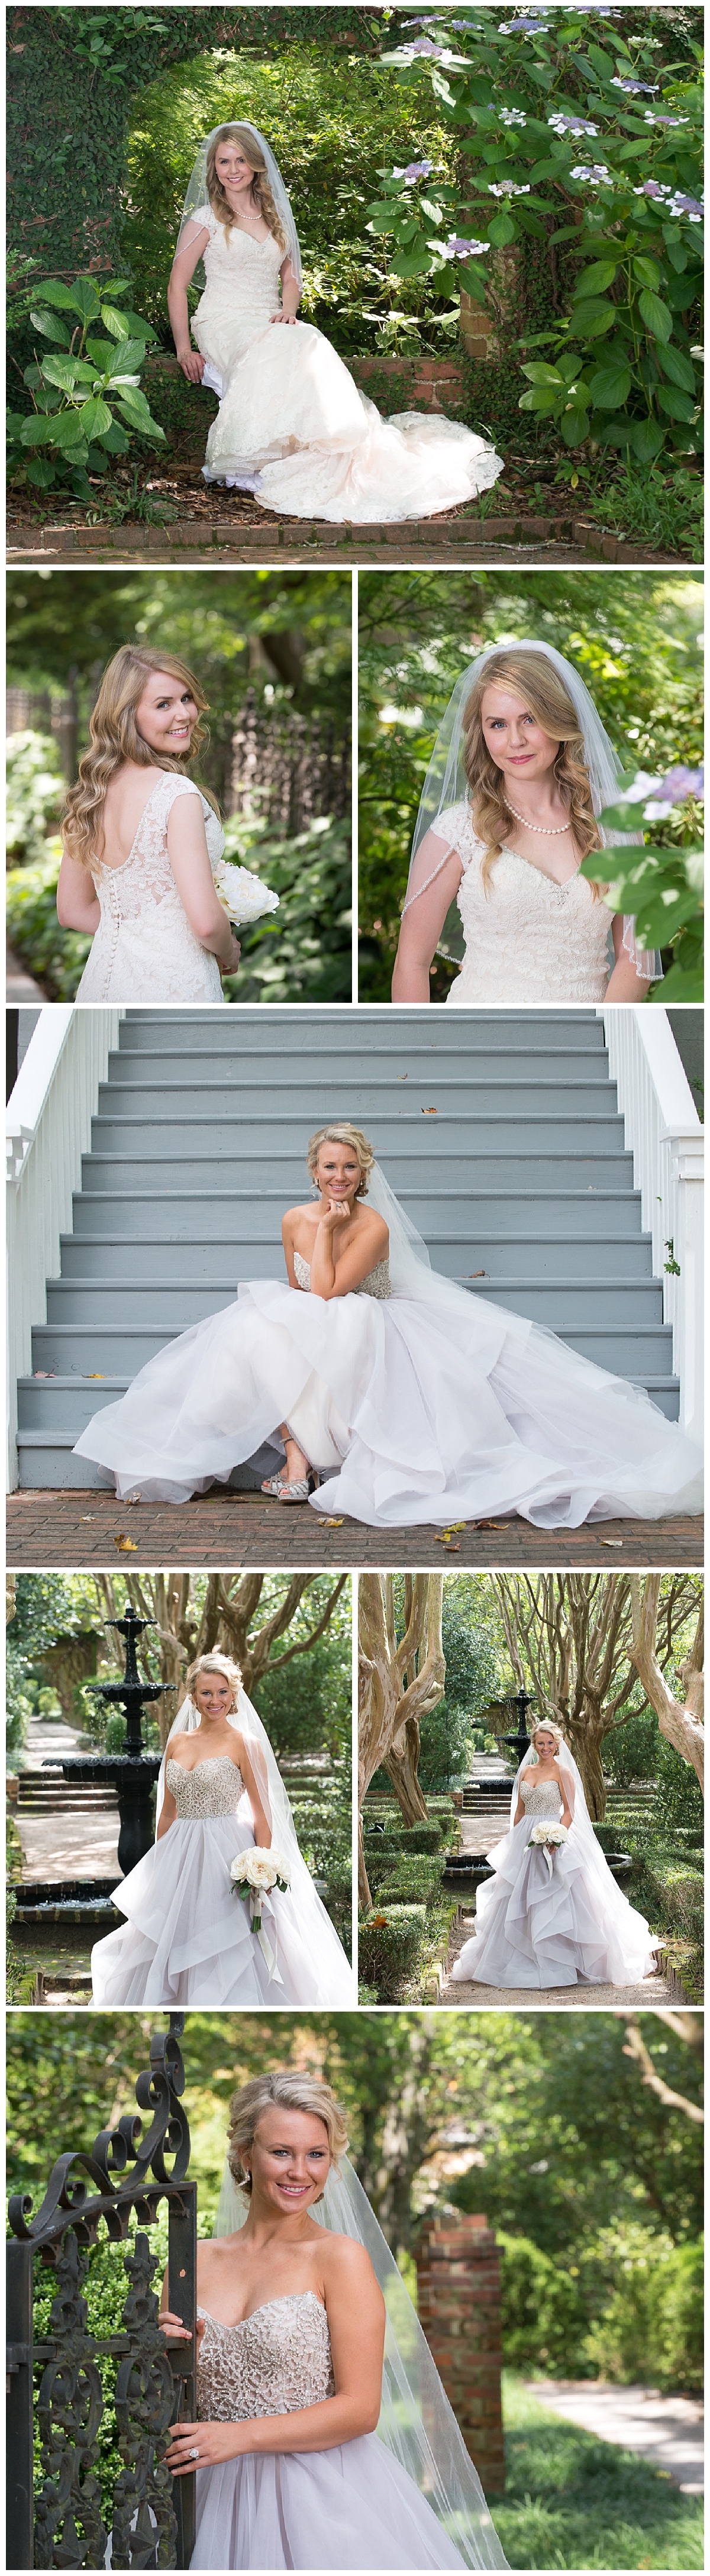 Governor's mansion and Lace House bridal portrait